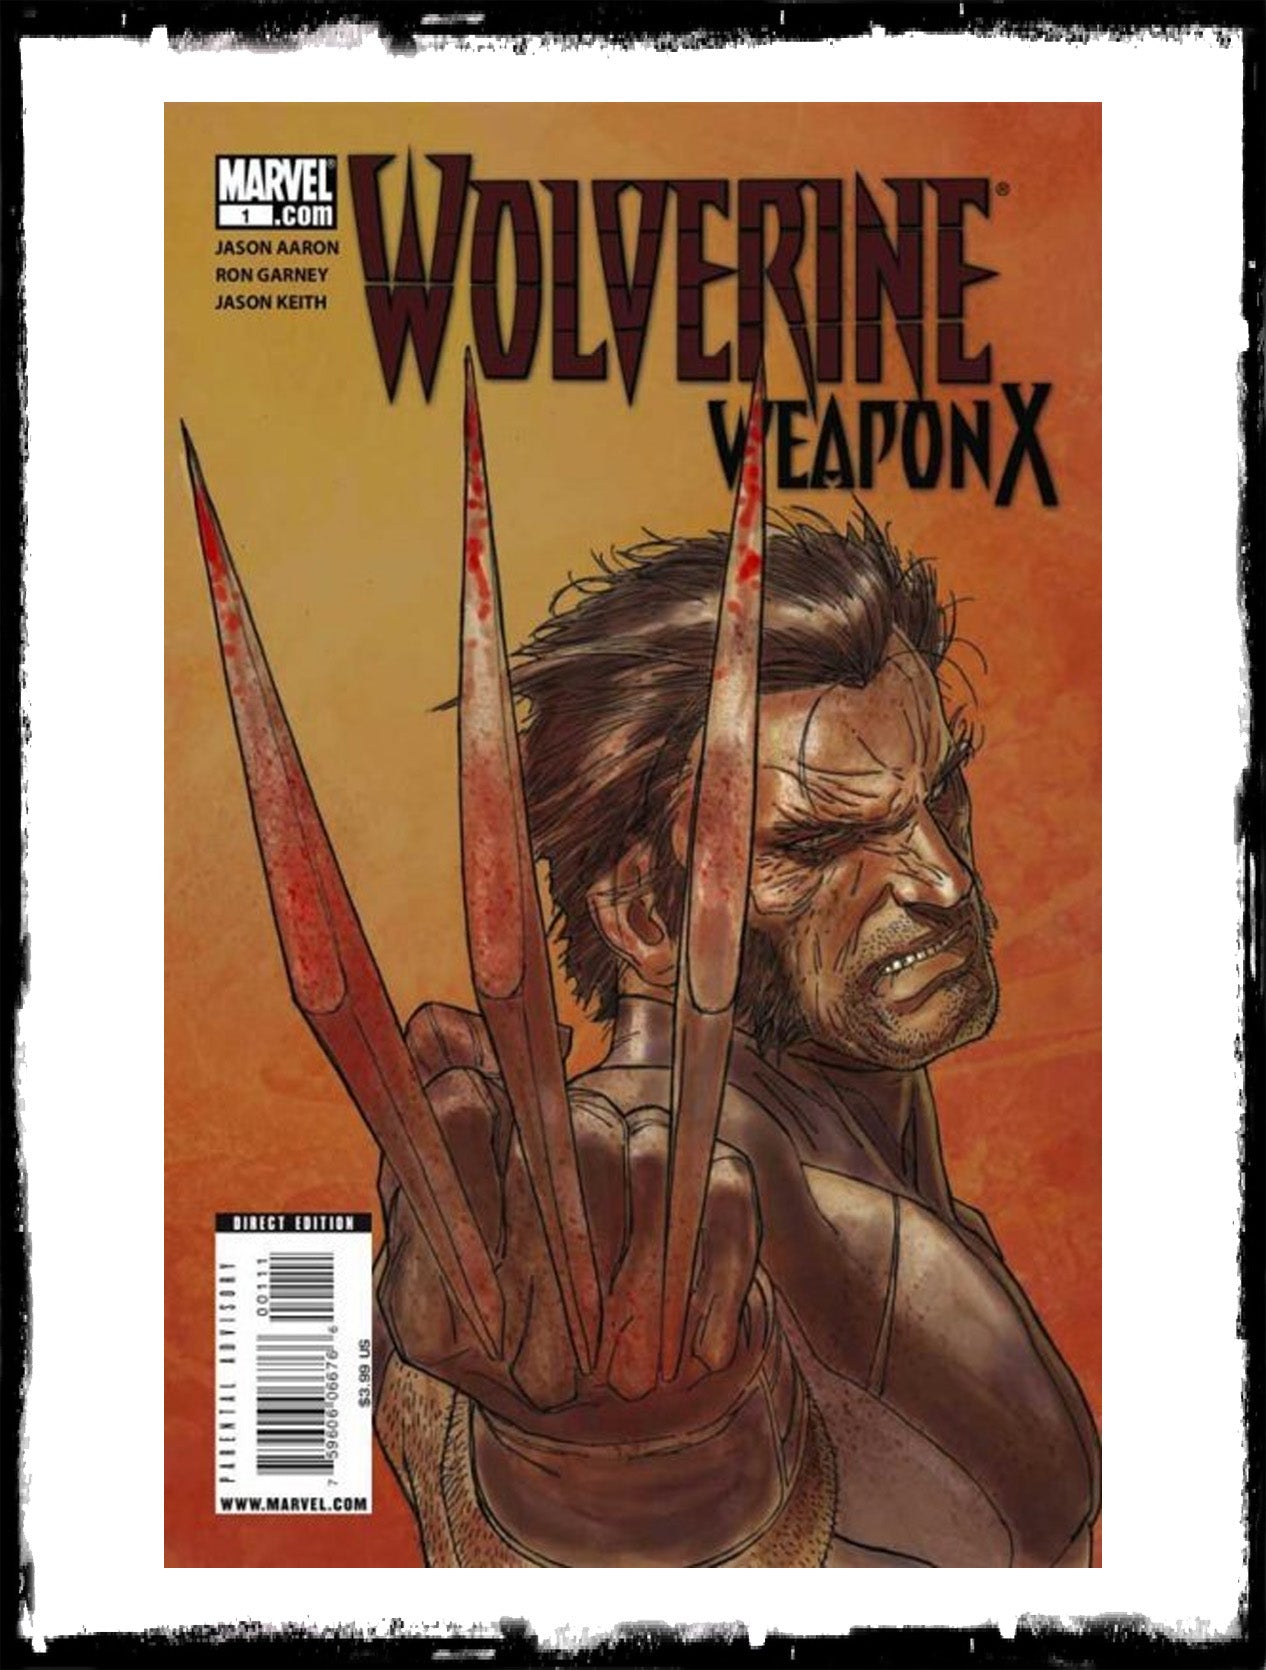 WOLVERINE: WEAPON X - #1 SIGNED BY JASON AARON (2009 - NM)